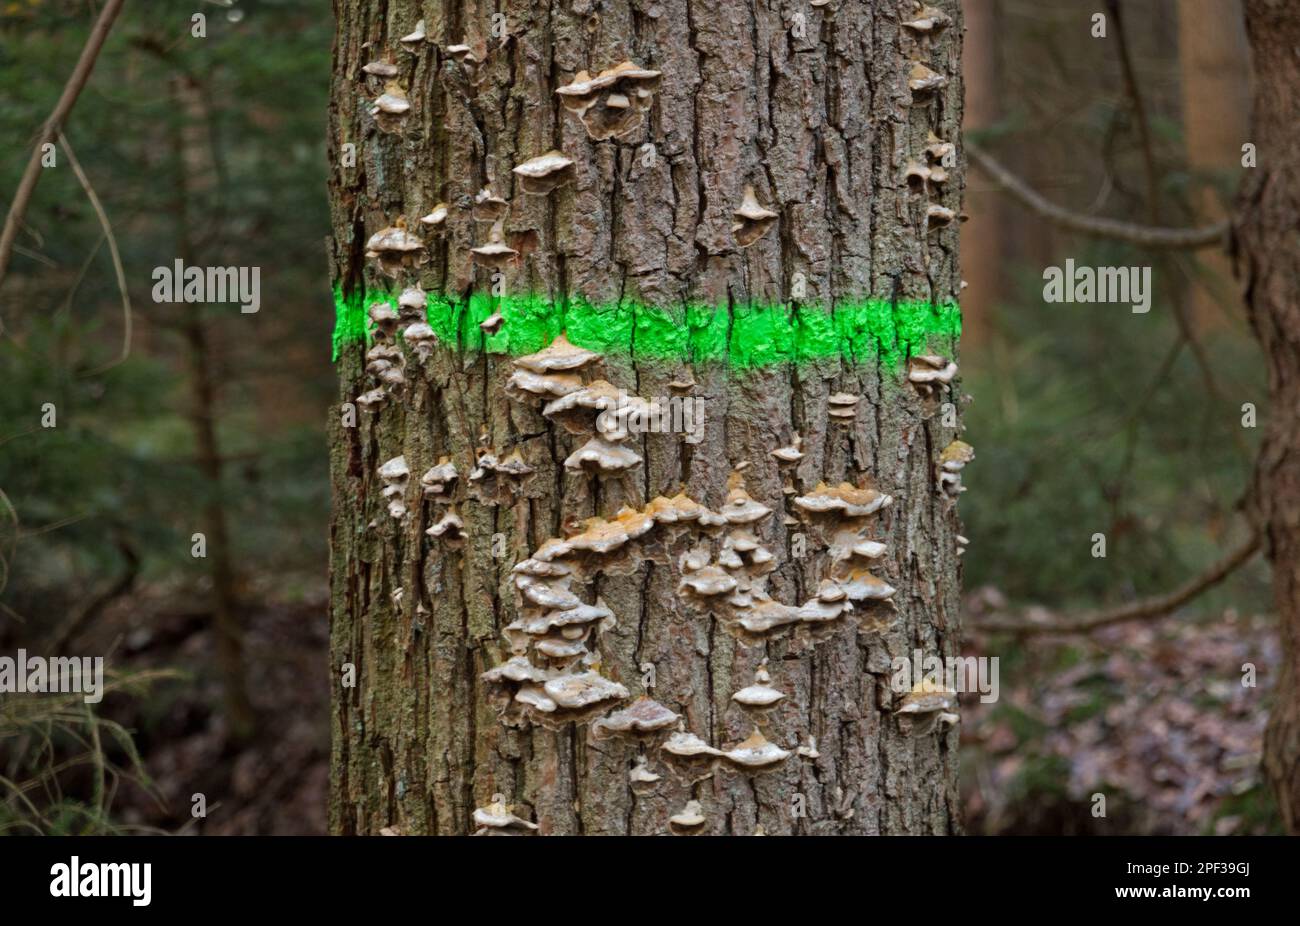 Oak tree, sick and dying, infested with mushrooms, marked with green paint marked to be cut down Stock Photo